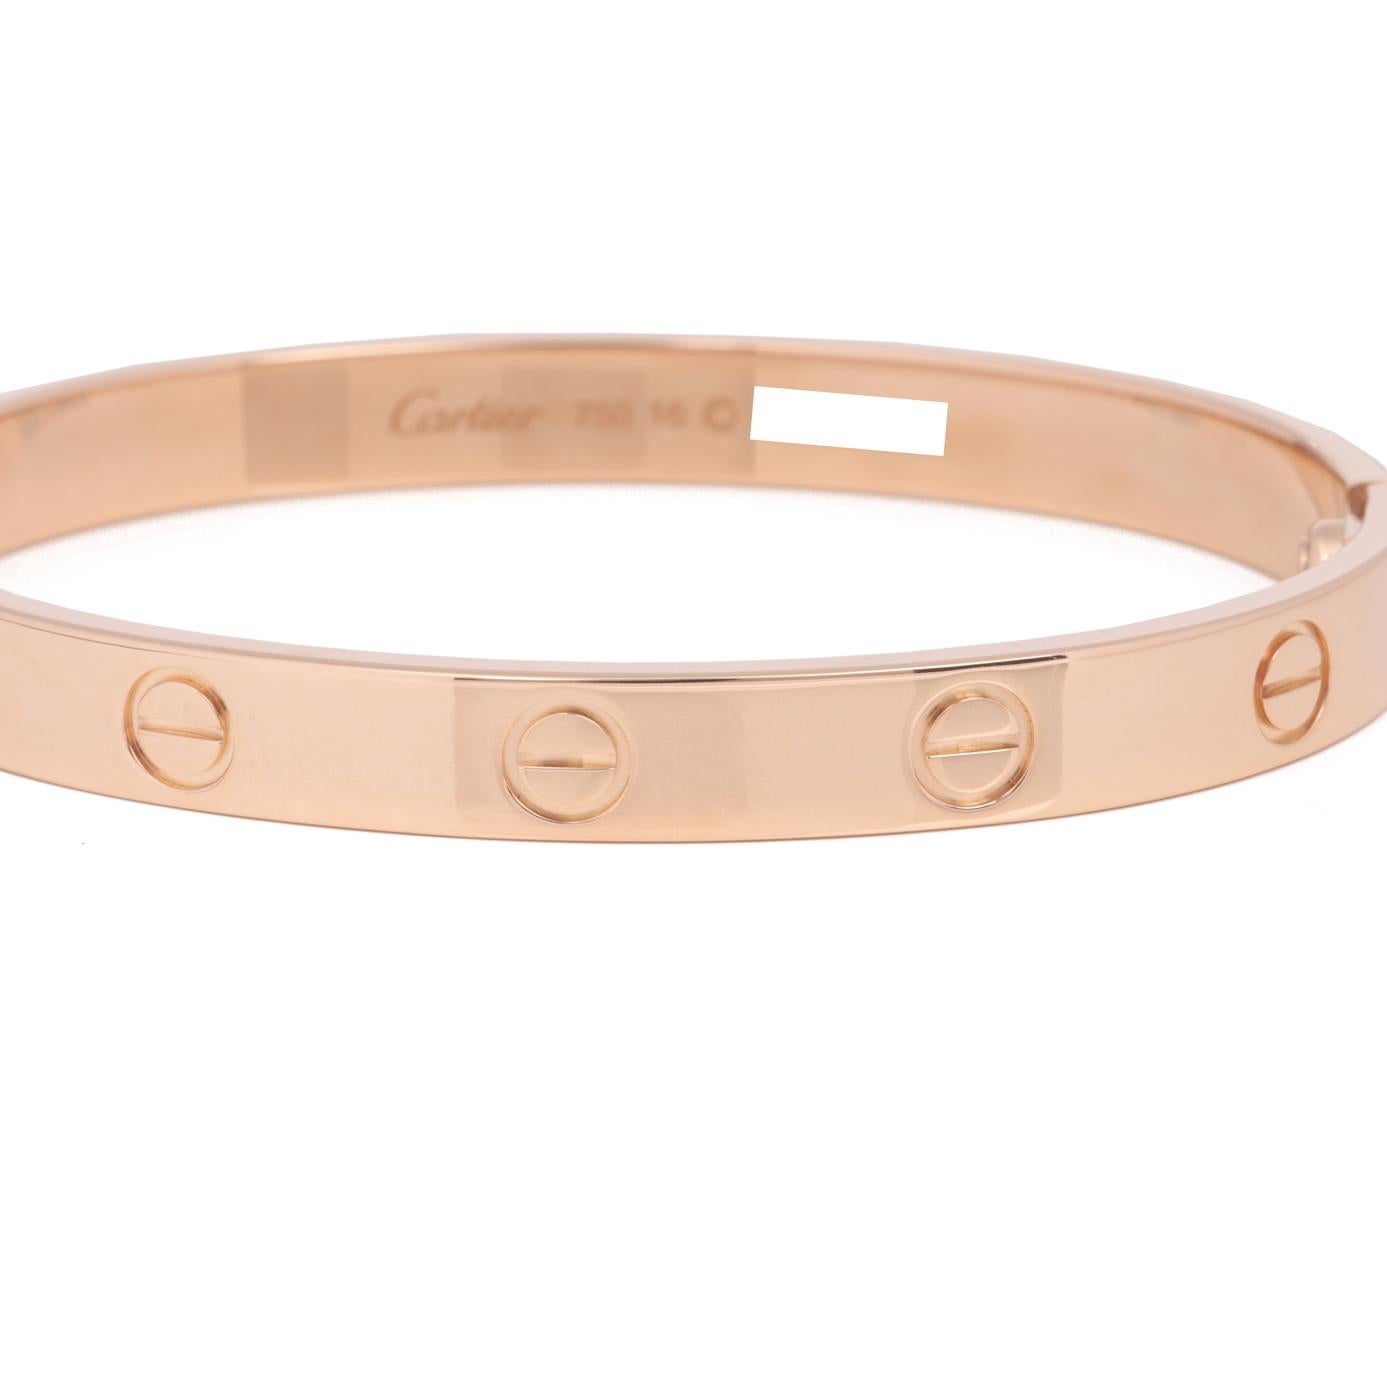 Cartier 18ct Rose Gold Love Bangle

Brand- Cartier
Model- Love Bangle
Product Type- Bracelet
Serial Number- R******
Accompanied By- Cartier Pouch, Service Papers, Screwdriver
Material(s)- 18ct Rose Gold

Bracelet Length- 16cm
Bracelet Width-